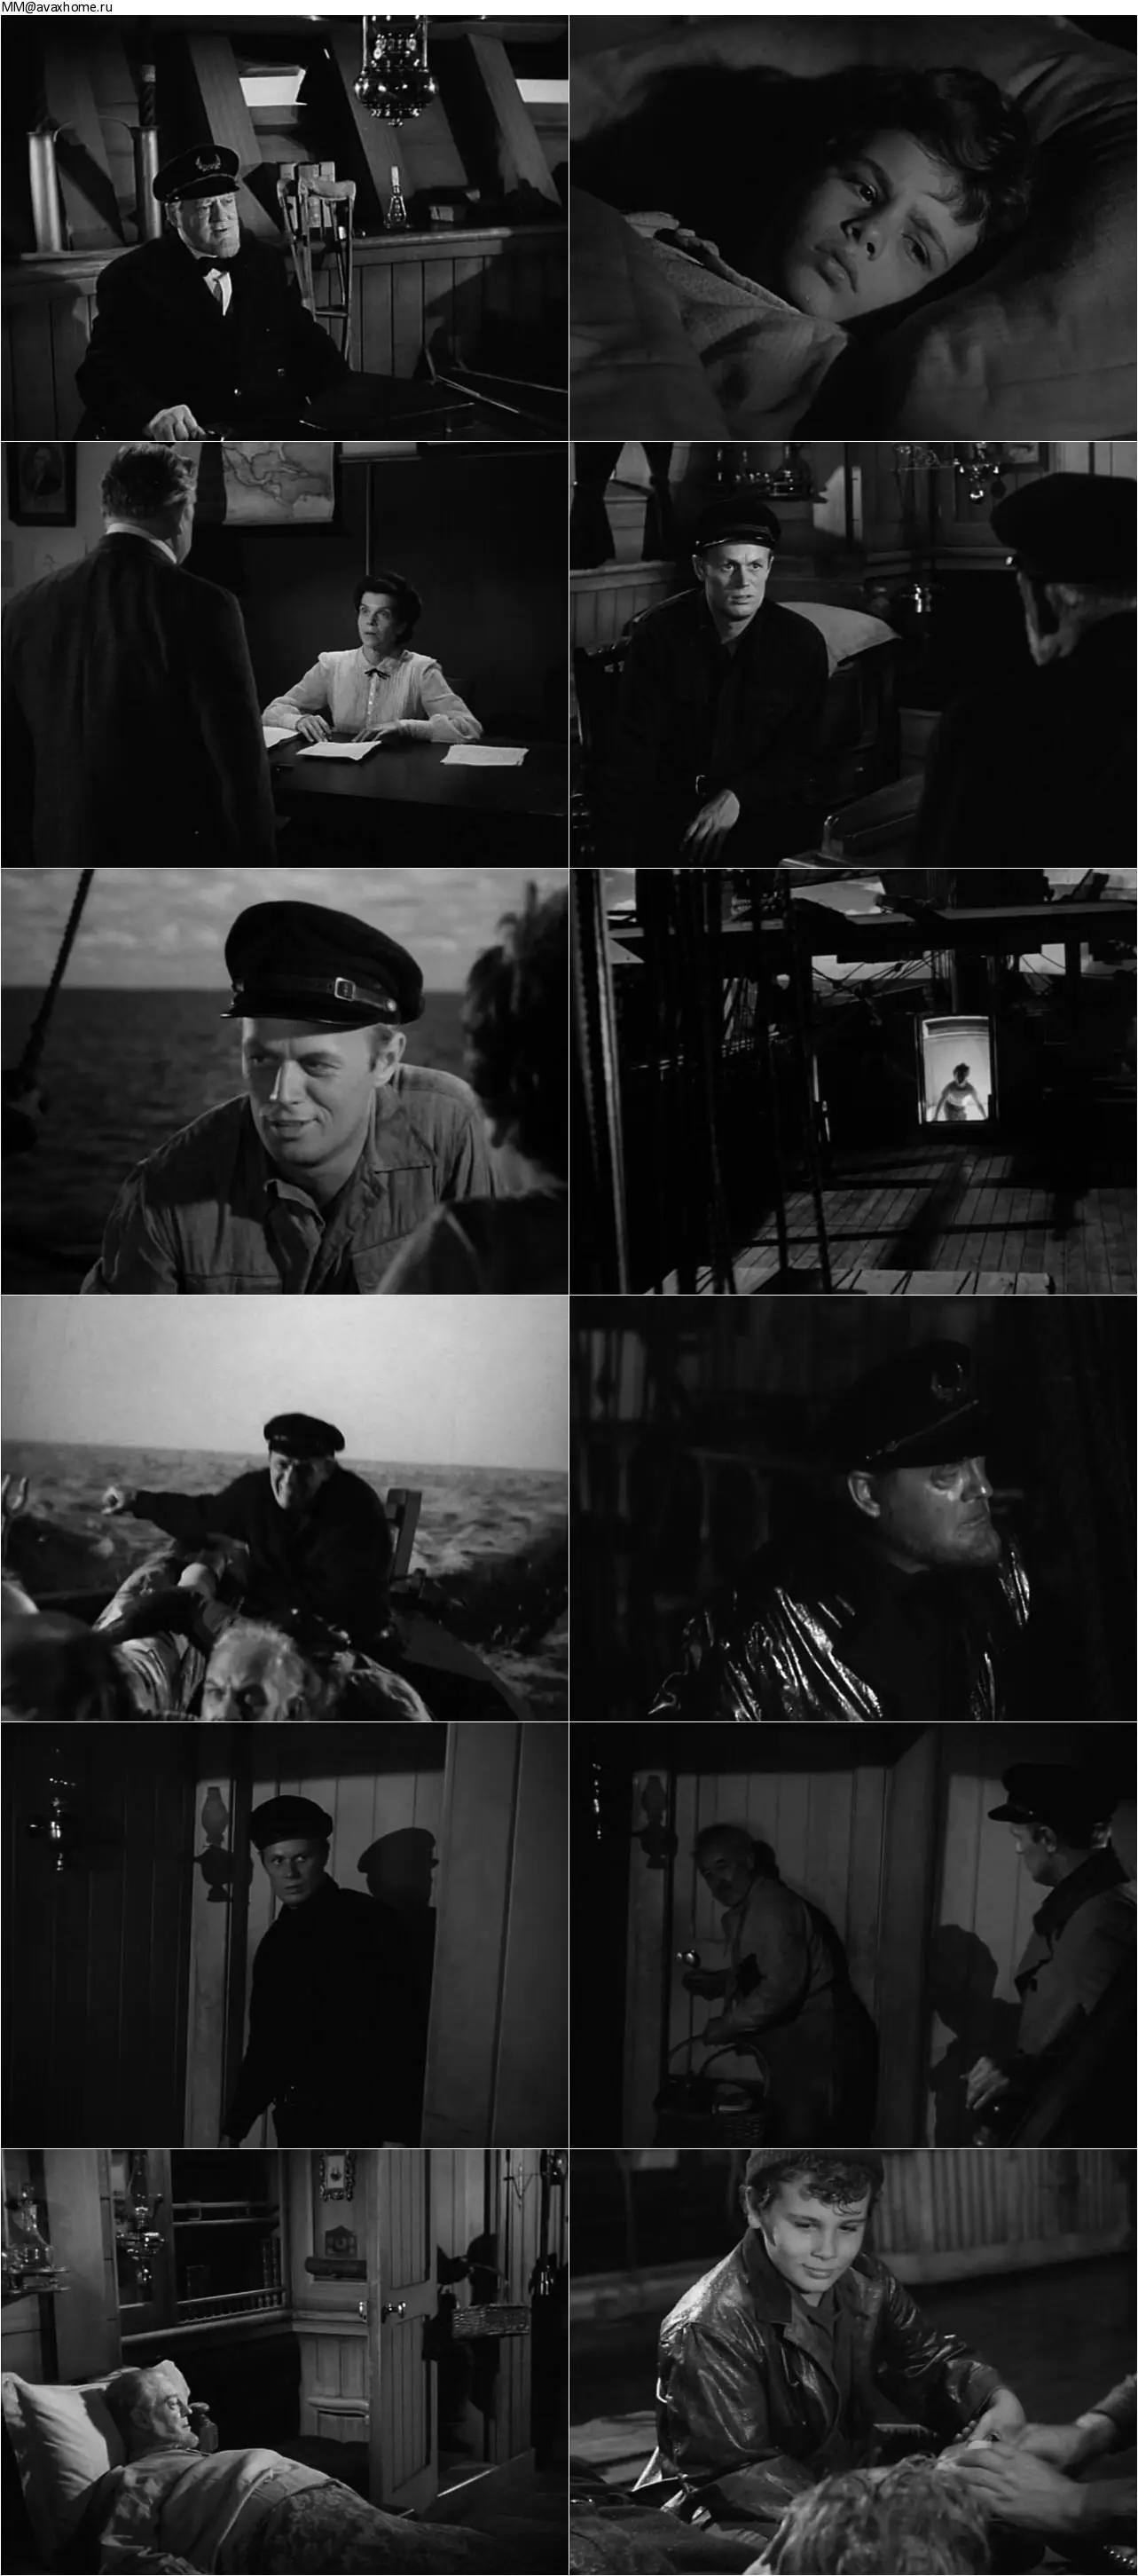 Down to the Sea in Ships (1949)